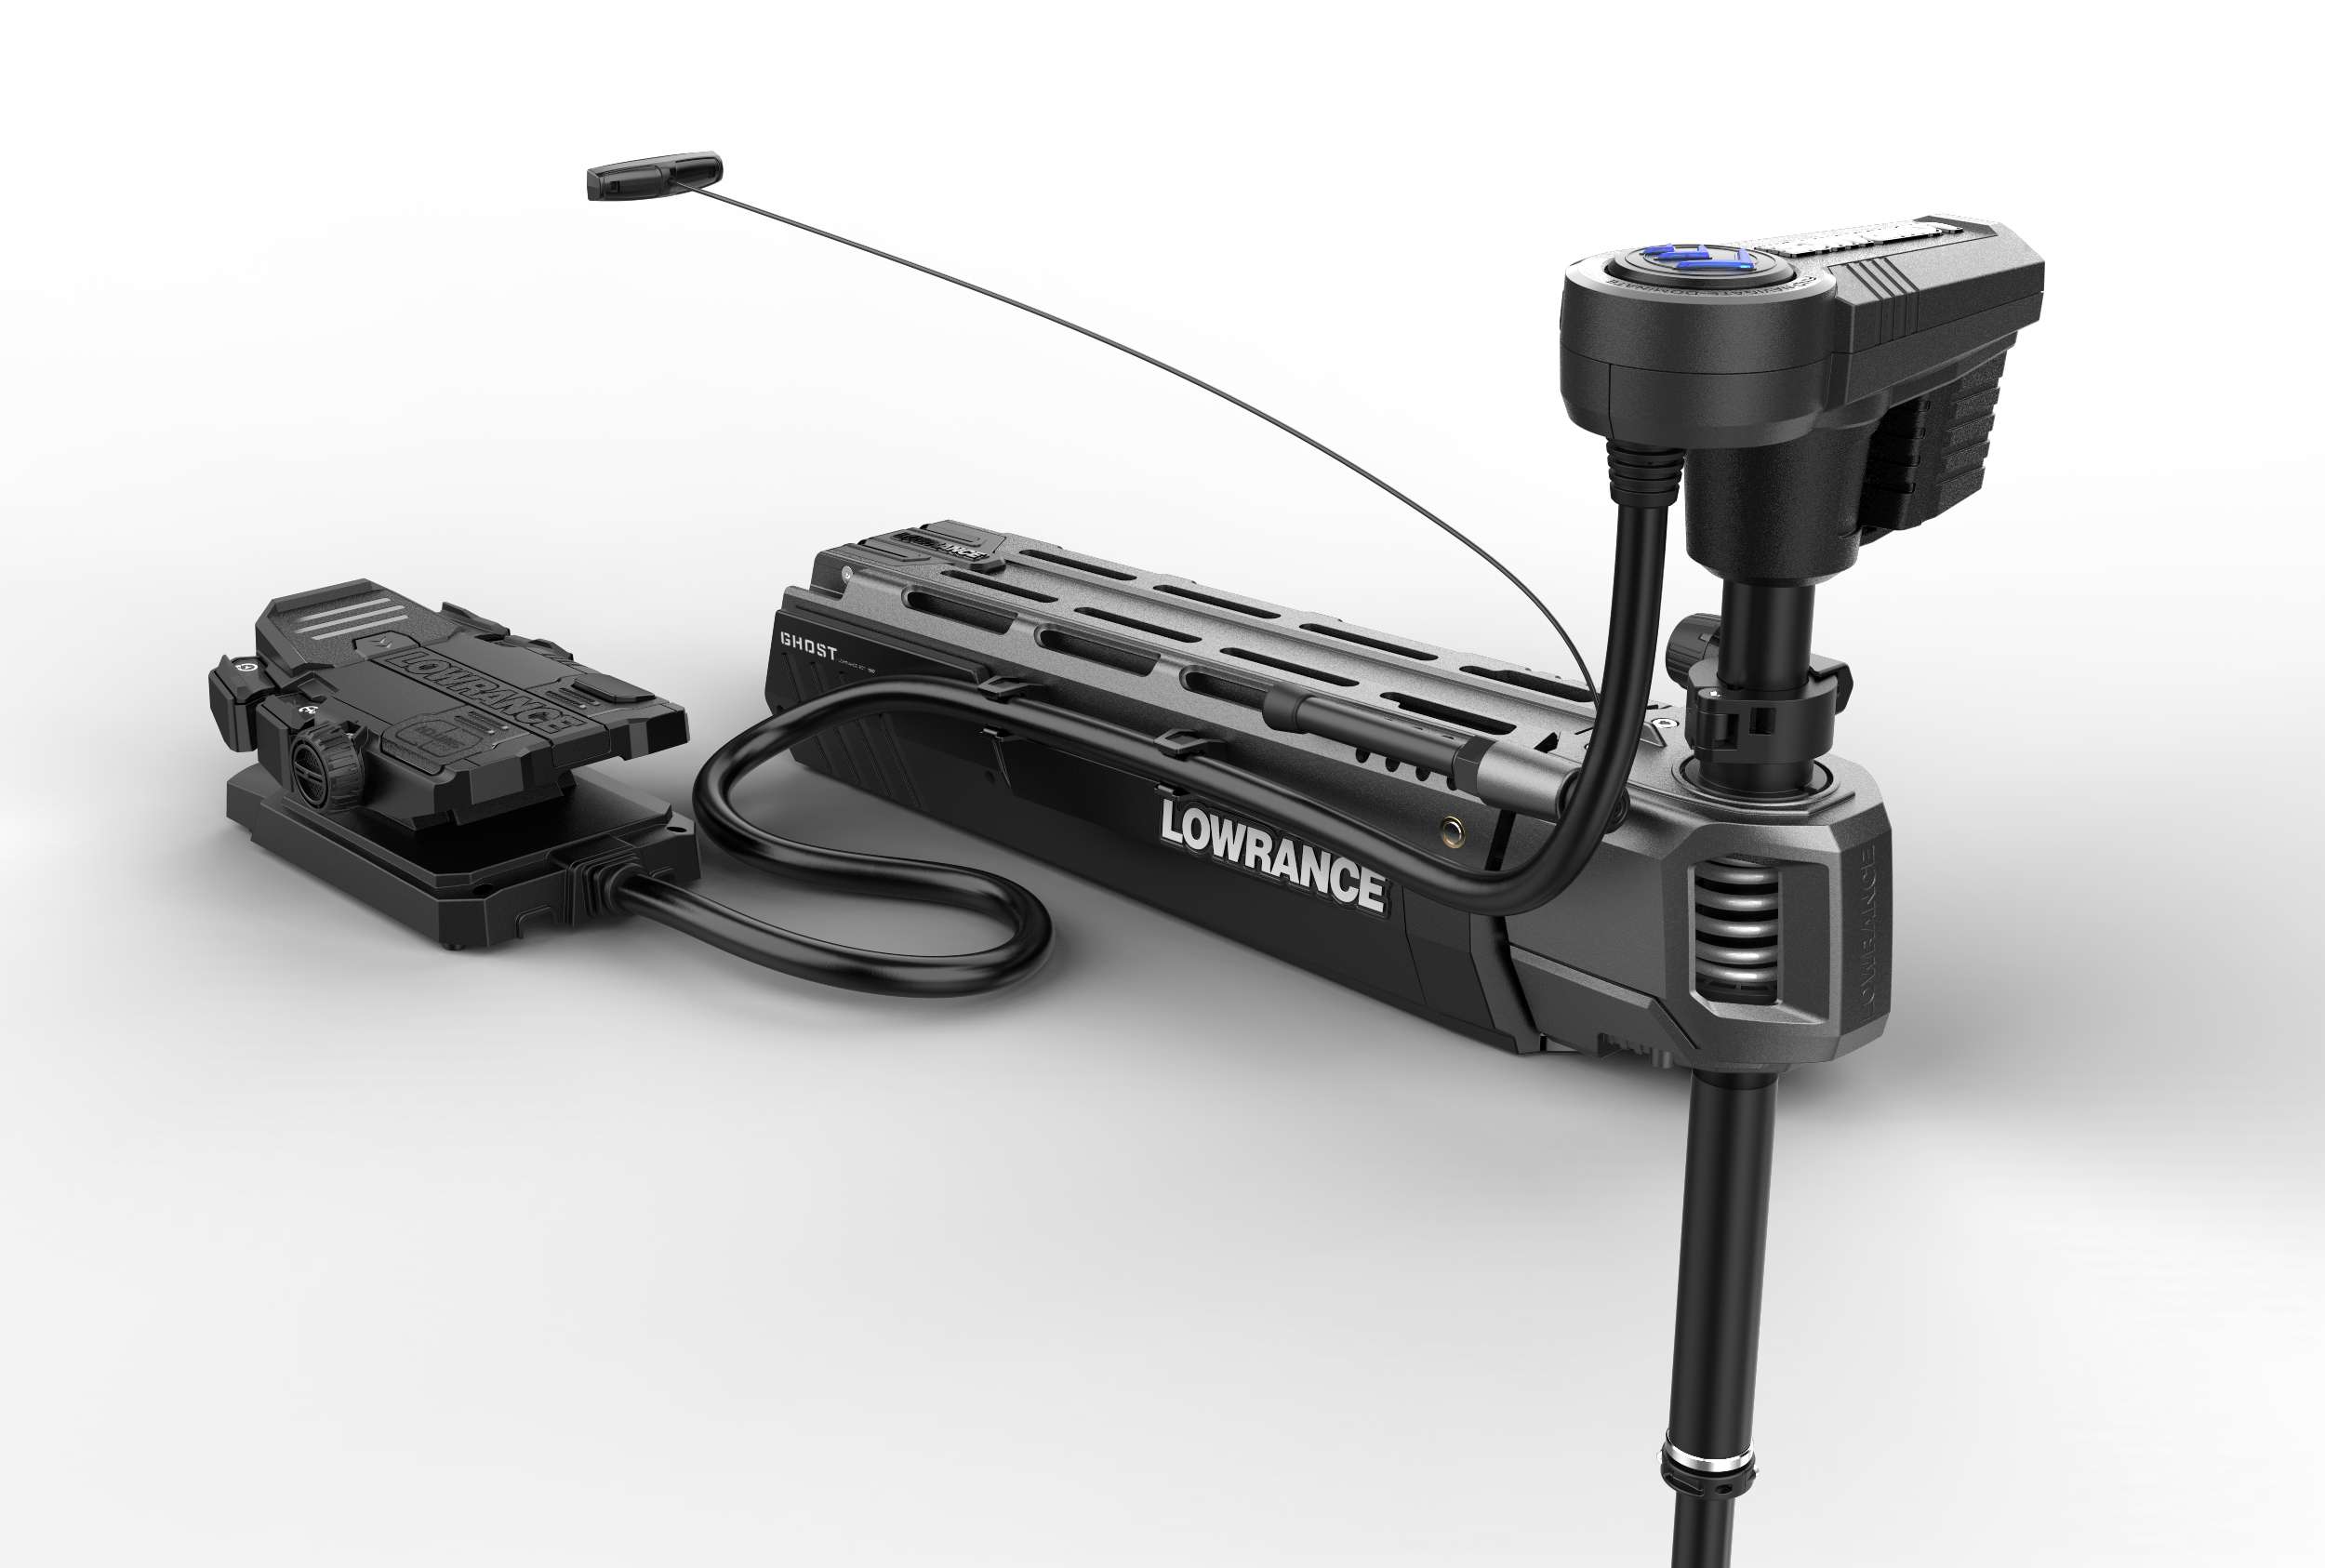 For more than 60 years, Lowrance has been helping anglers find fish with award-winning innovations in sonar technology, navigation, radar and networking solutions. In 2019, Lowrance is taking a bold step forward in this tradition with the release of the new Lowrance Ghost freshwater trolling motor.